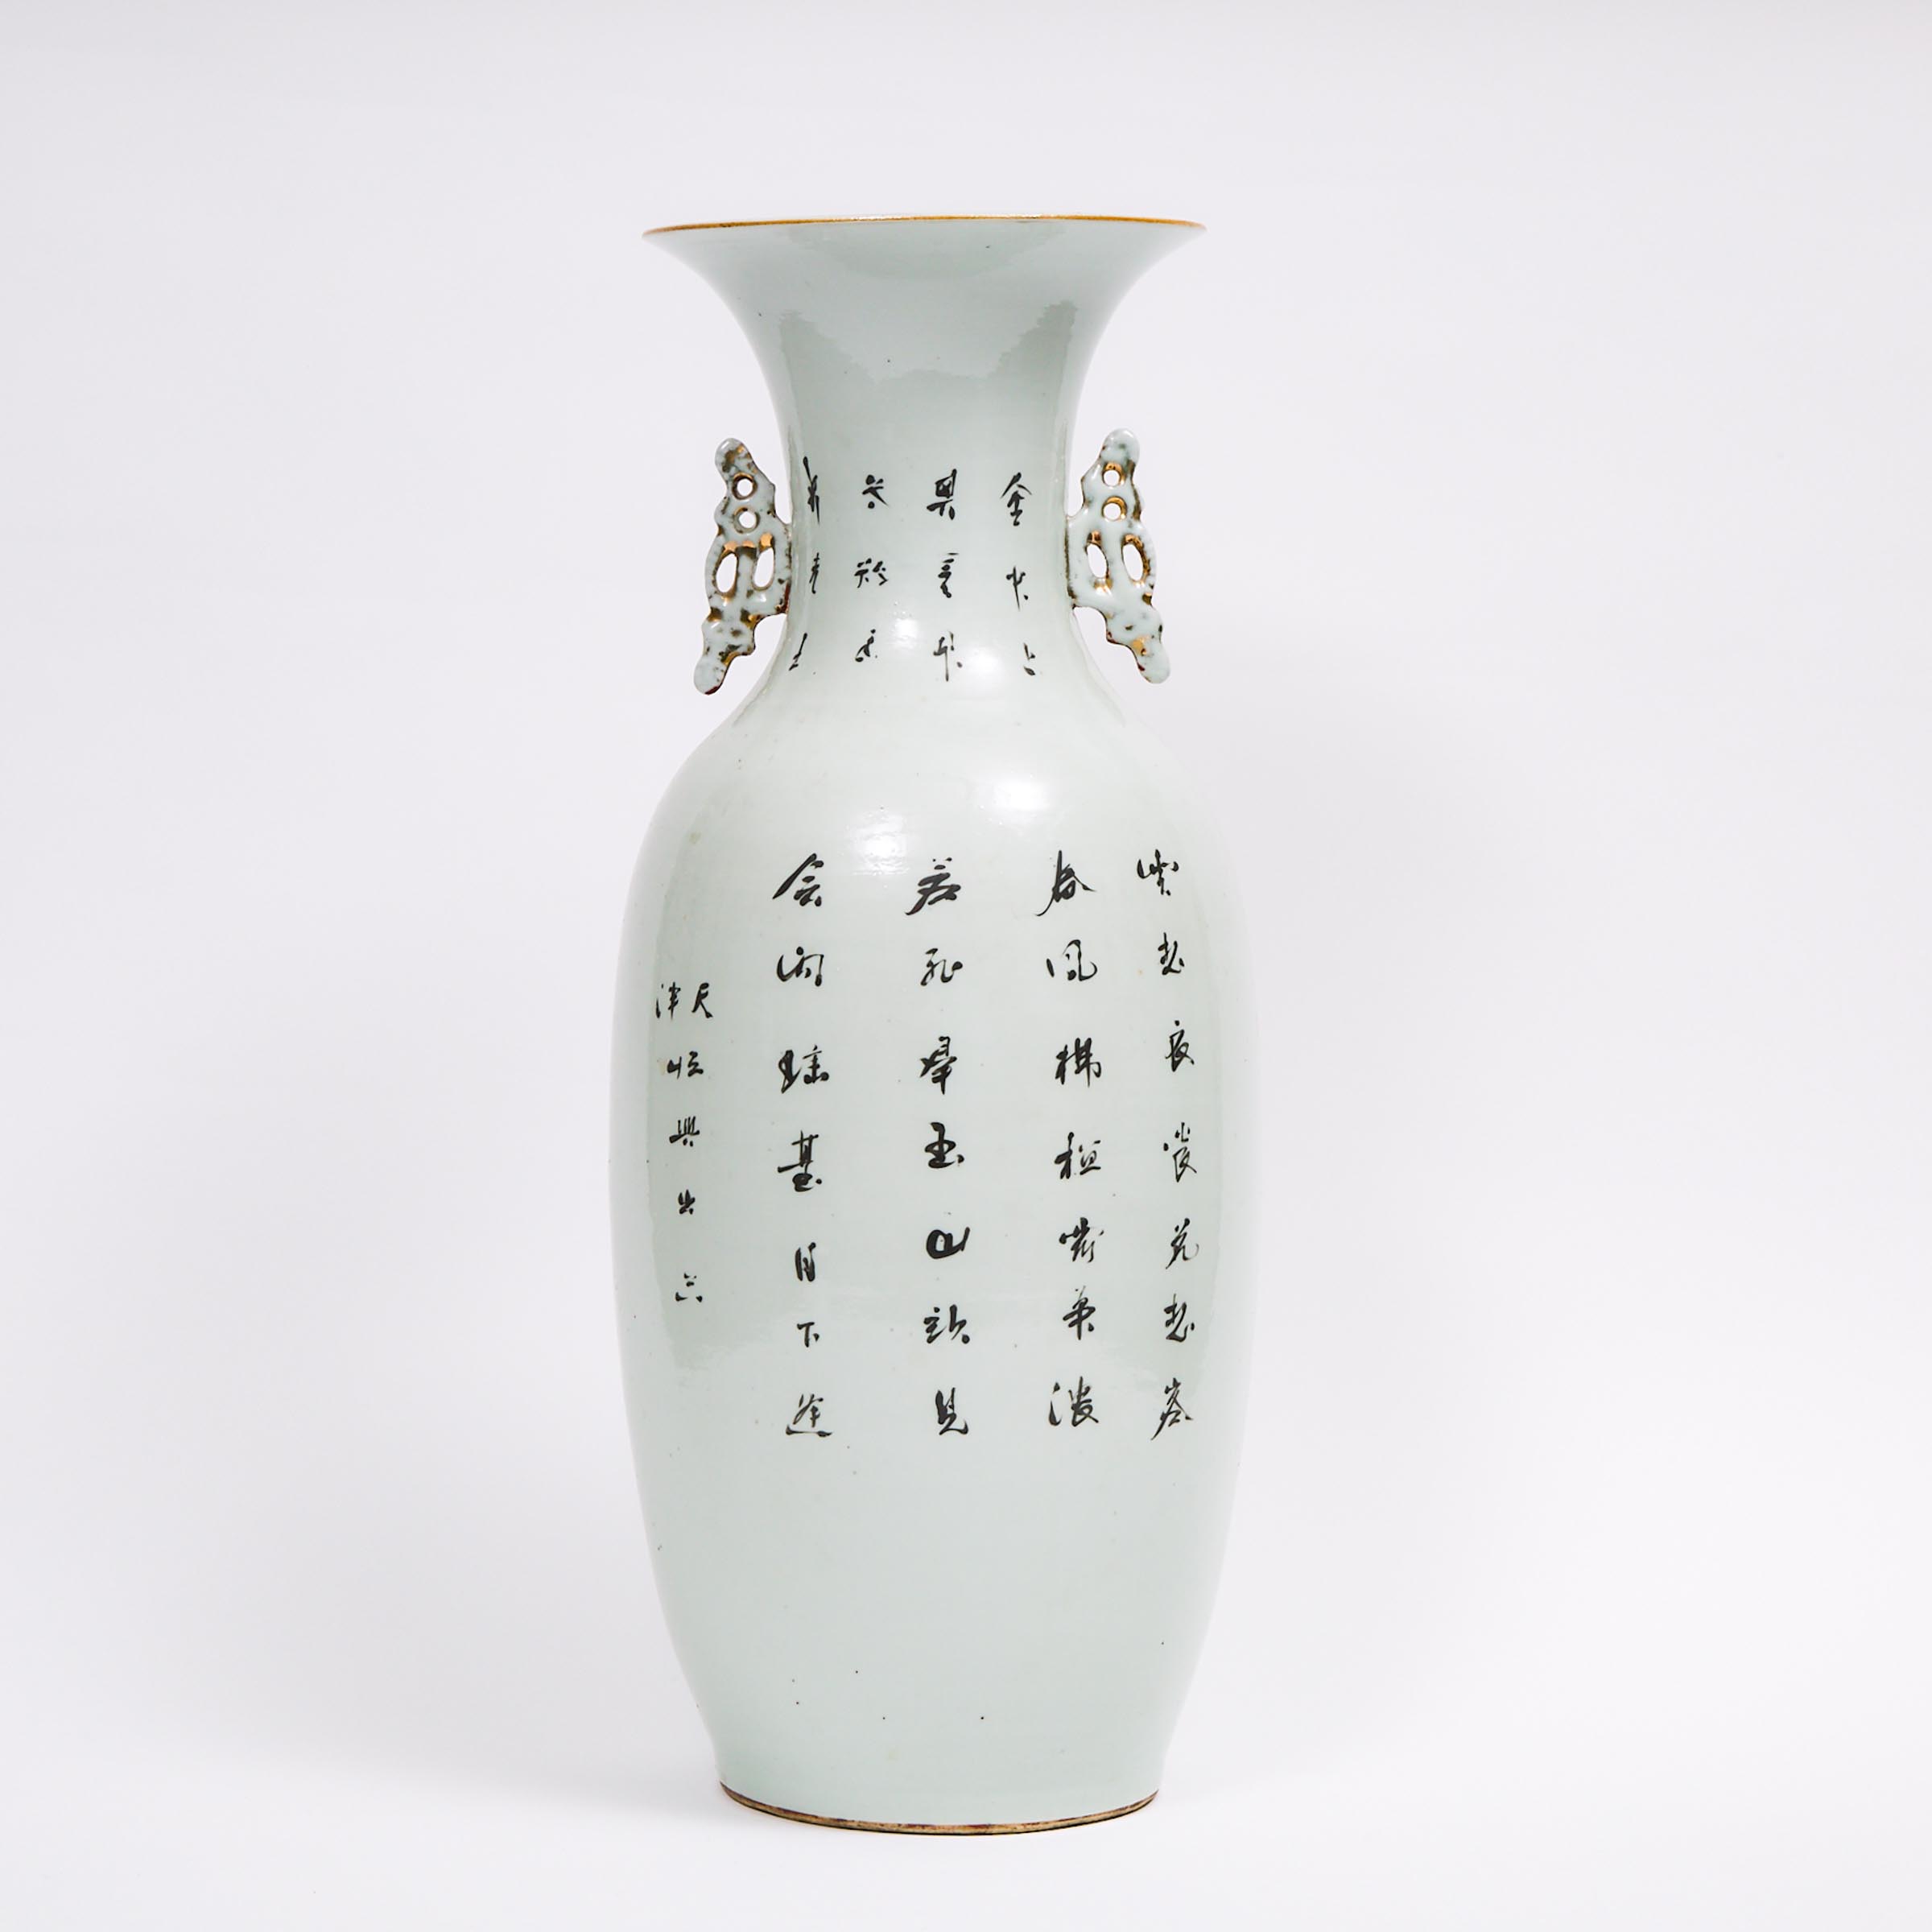 A Large Enameled Porcelain Vase with Figures and Calligraphy